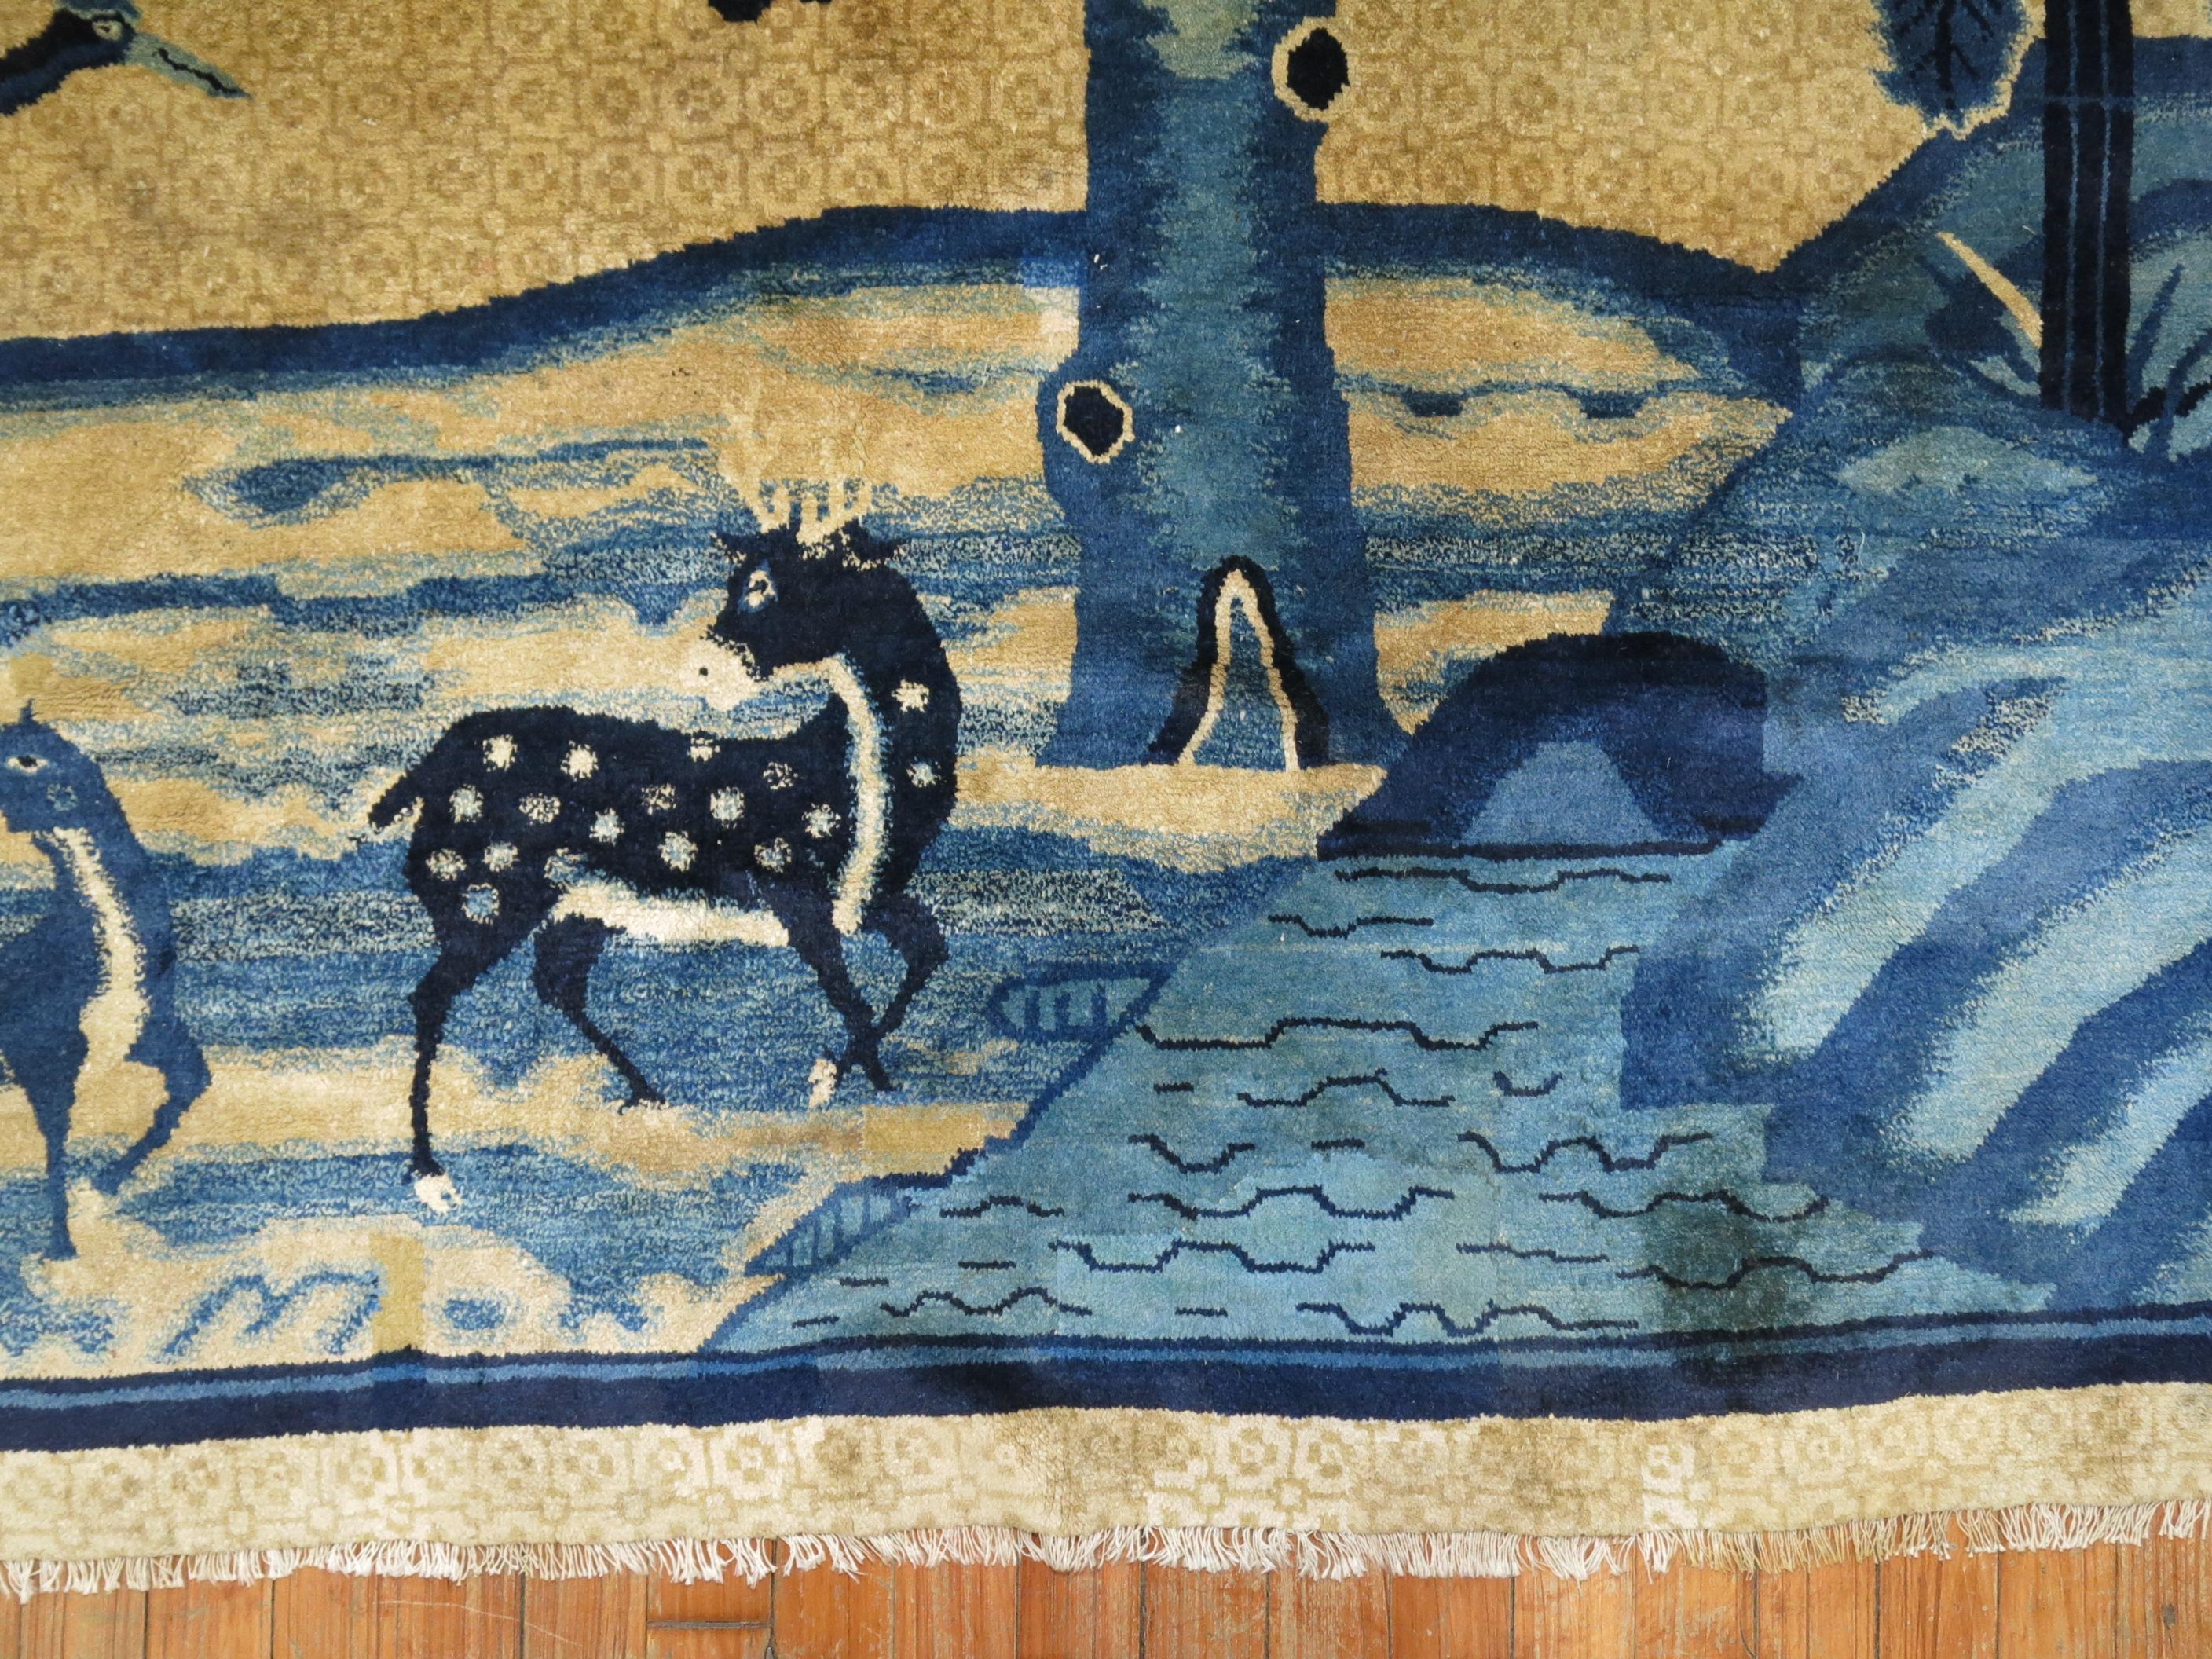 Blue Tan Chinese Animal Pictorial Landscape Rug im Zustand „Gut“ im Angebot in New York, NY